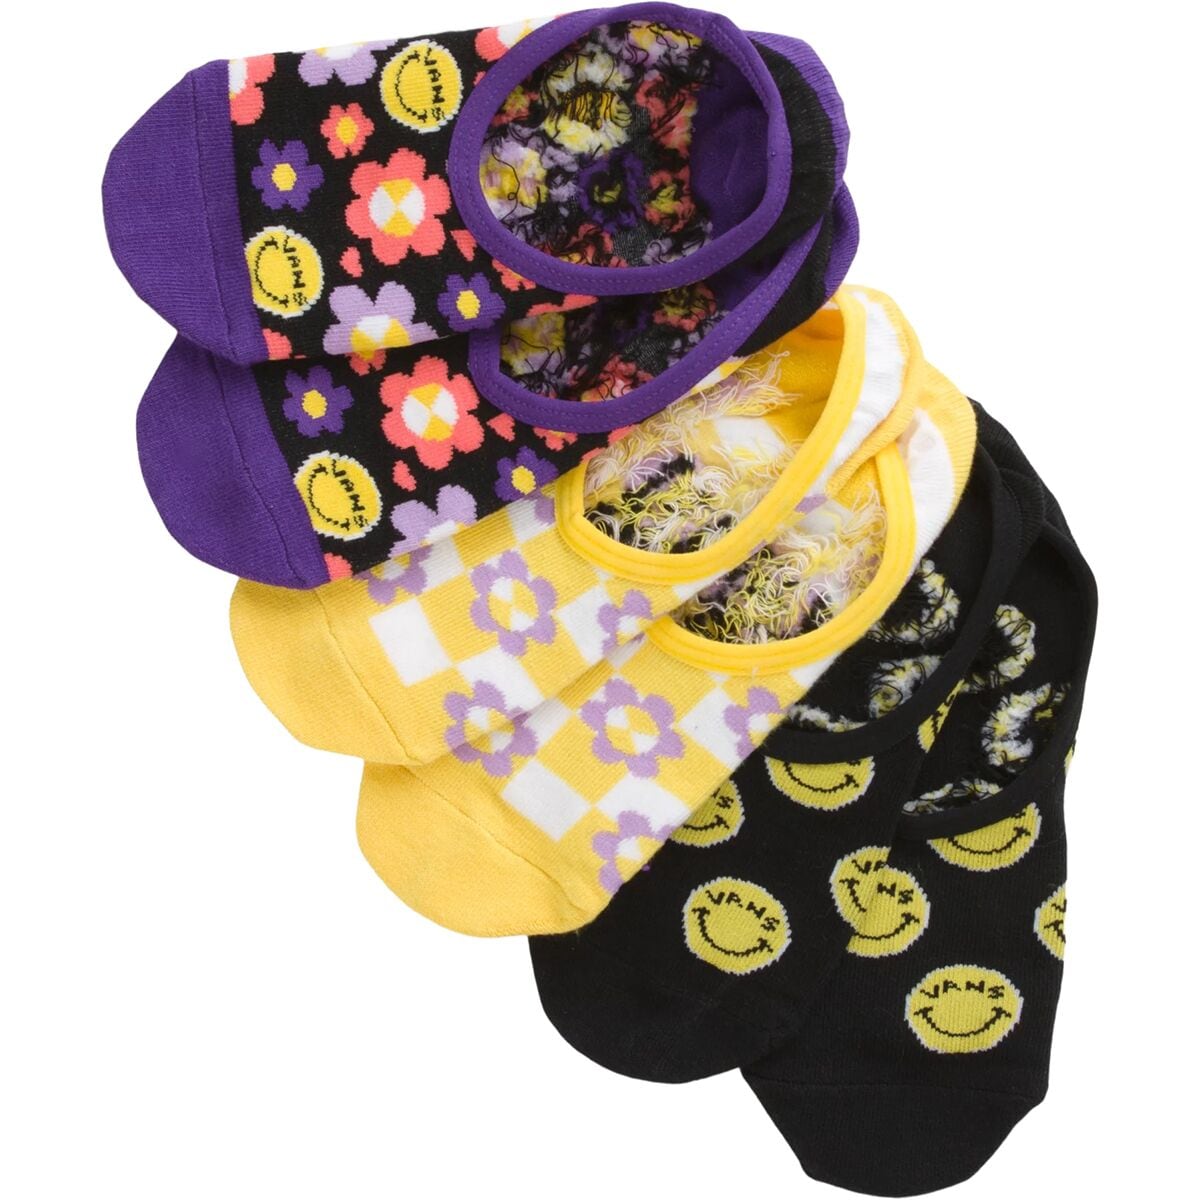 Vans Radically Happy Canoodle Sock - 3-Pack - Girls'